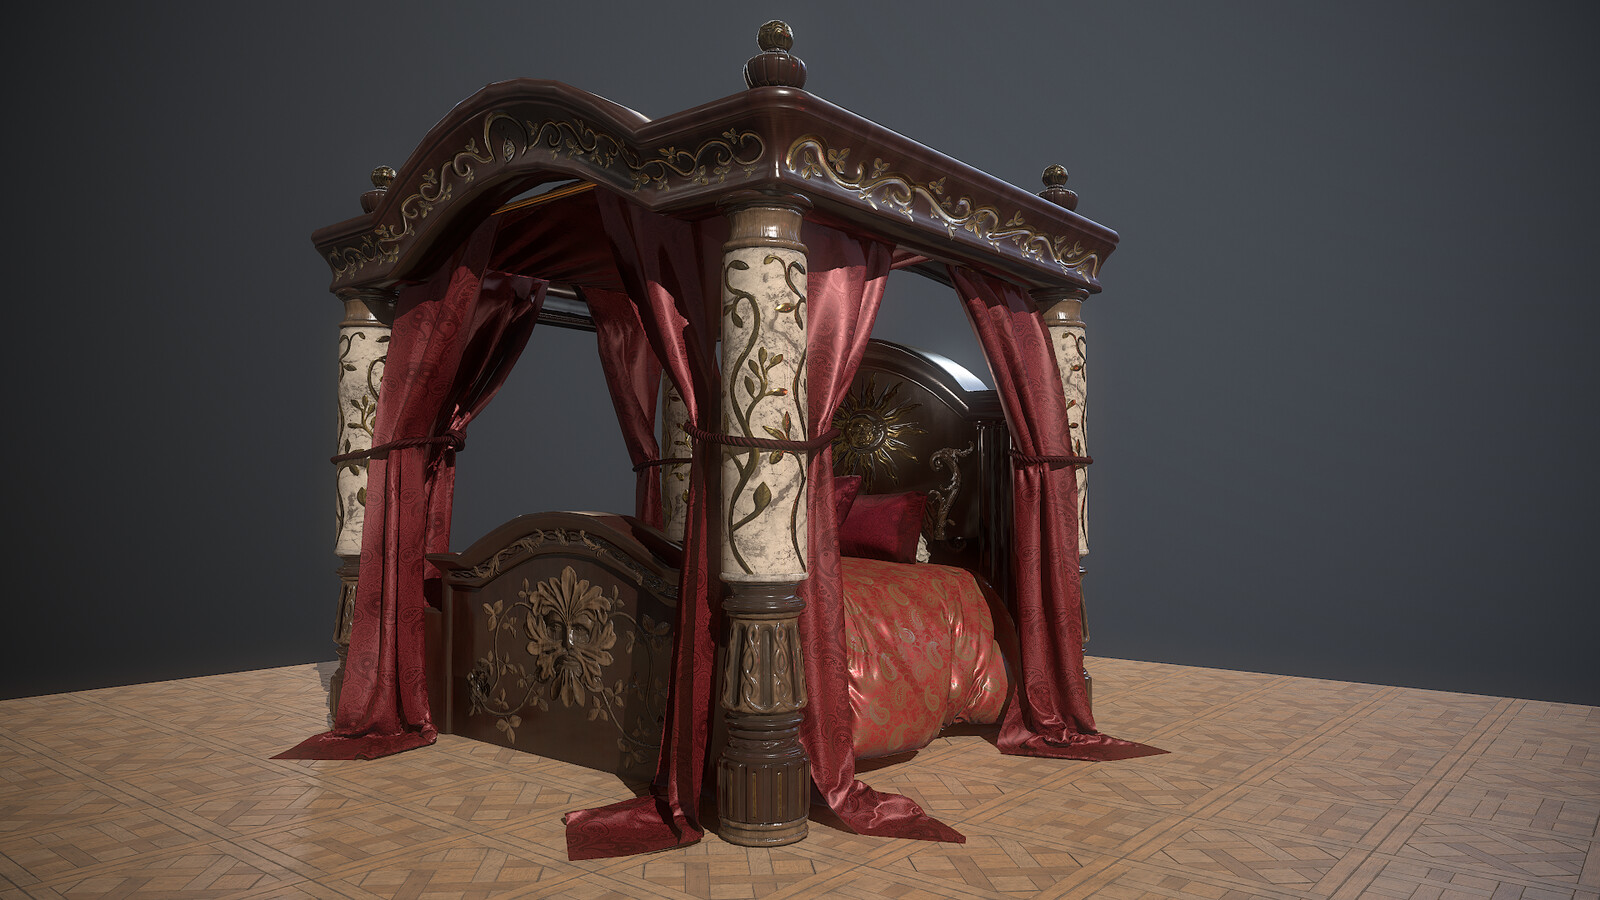 Canopy Bed. Base model in Max, sculpts in Zbrush, fabrics in Marvelous Designer, textures in Substance Painter and Photoshop. Rendered in Marmoset.